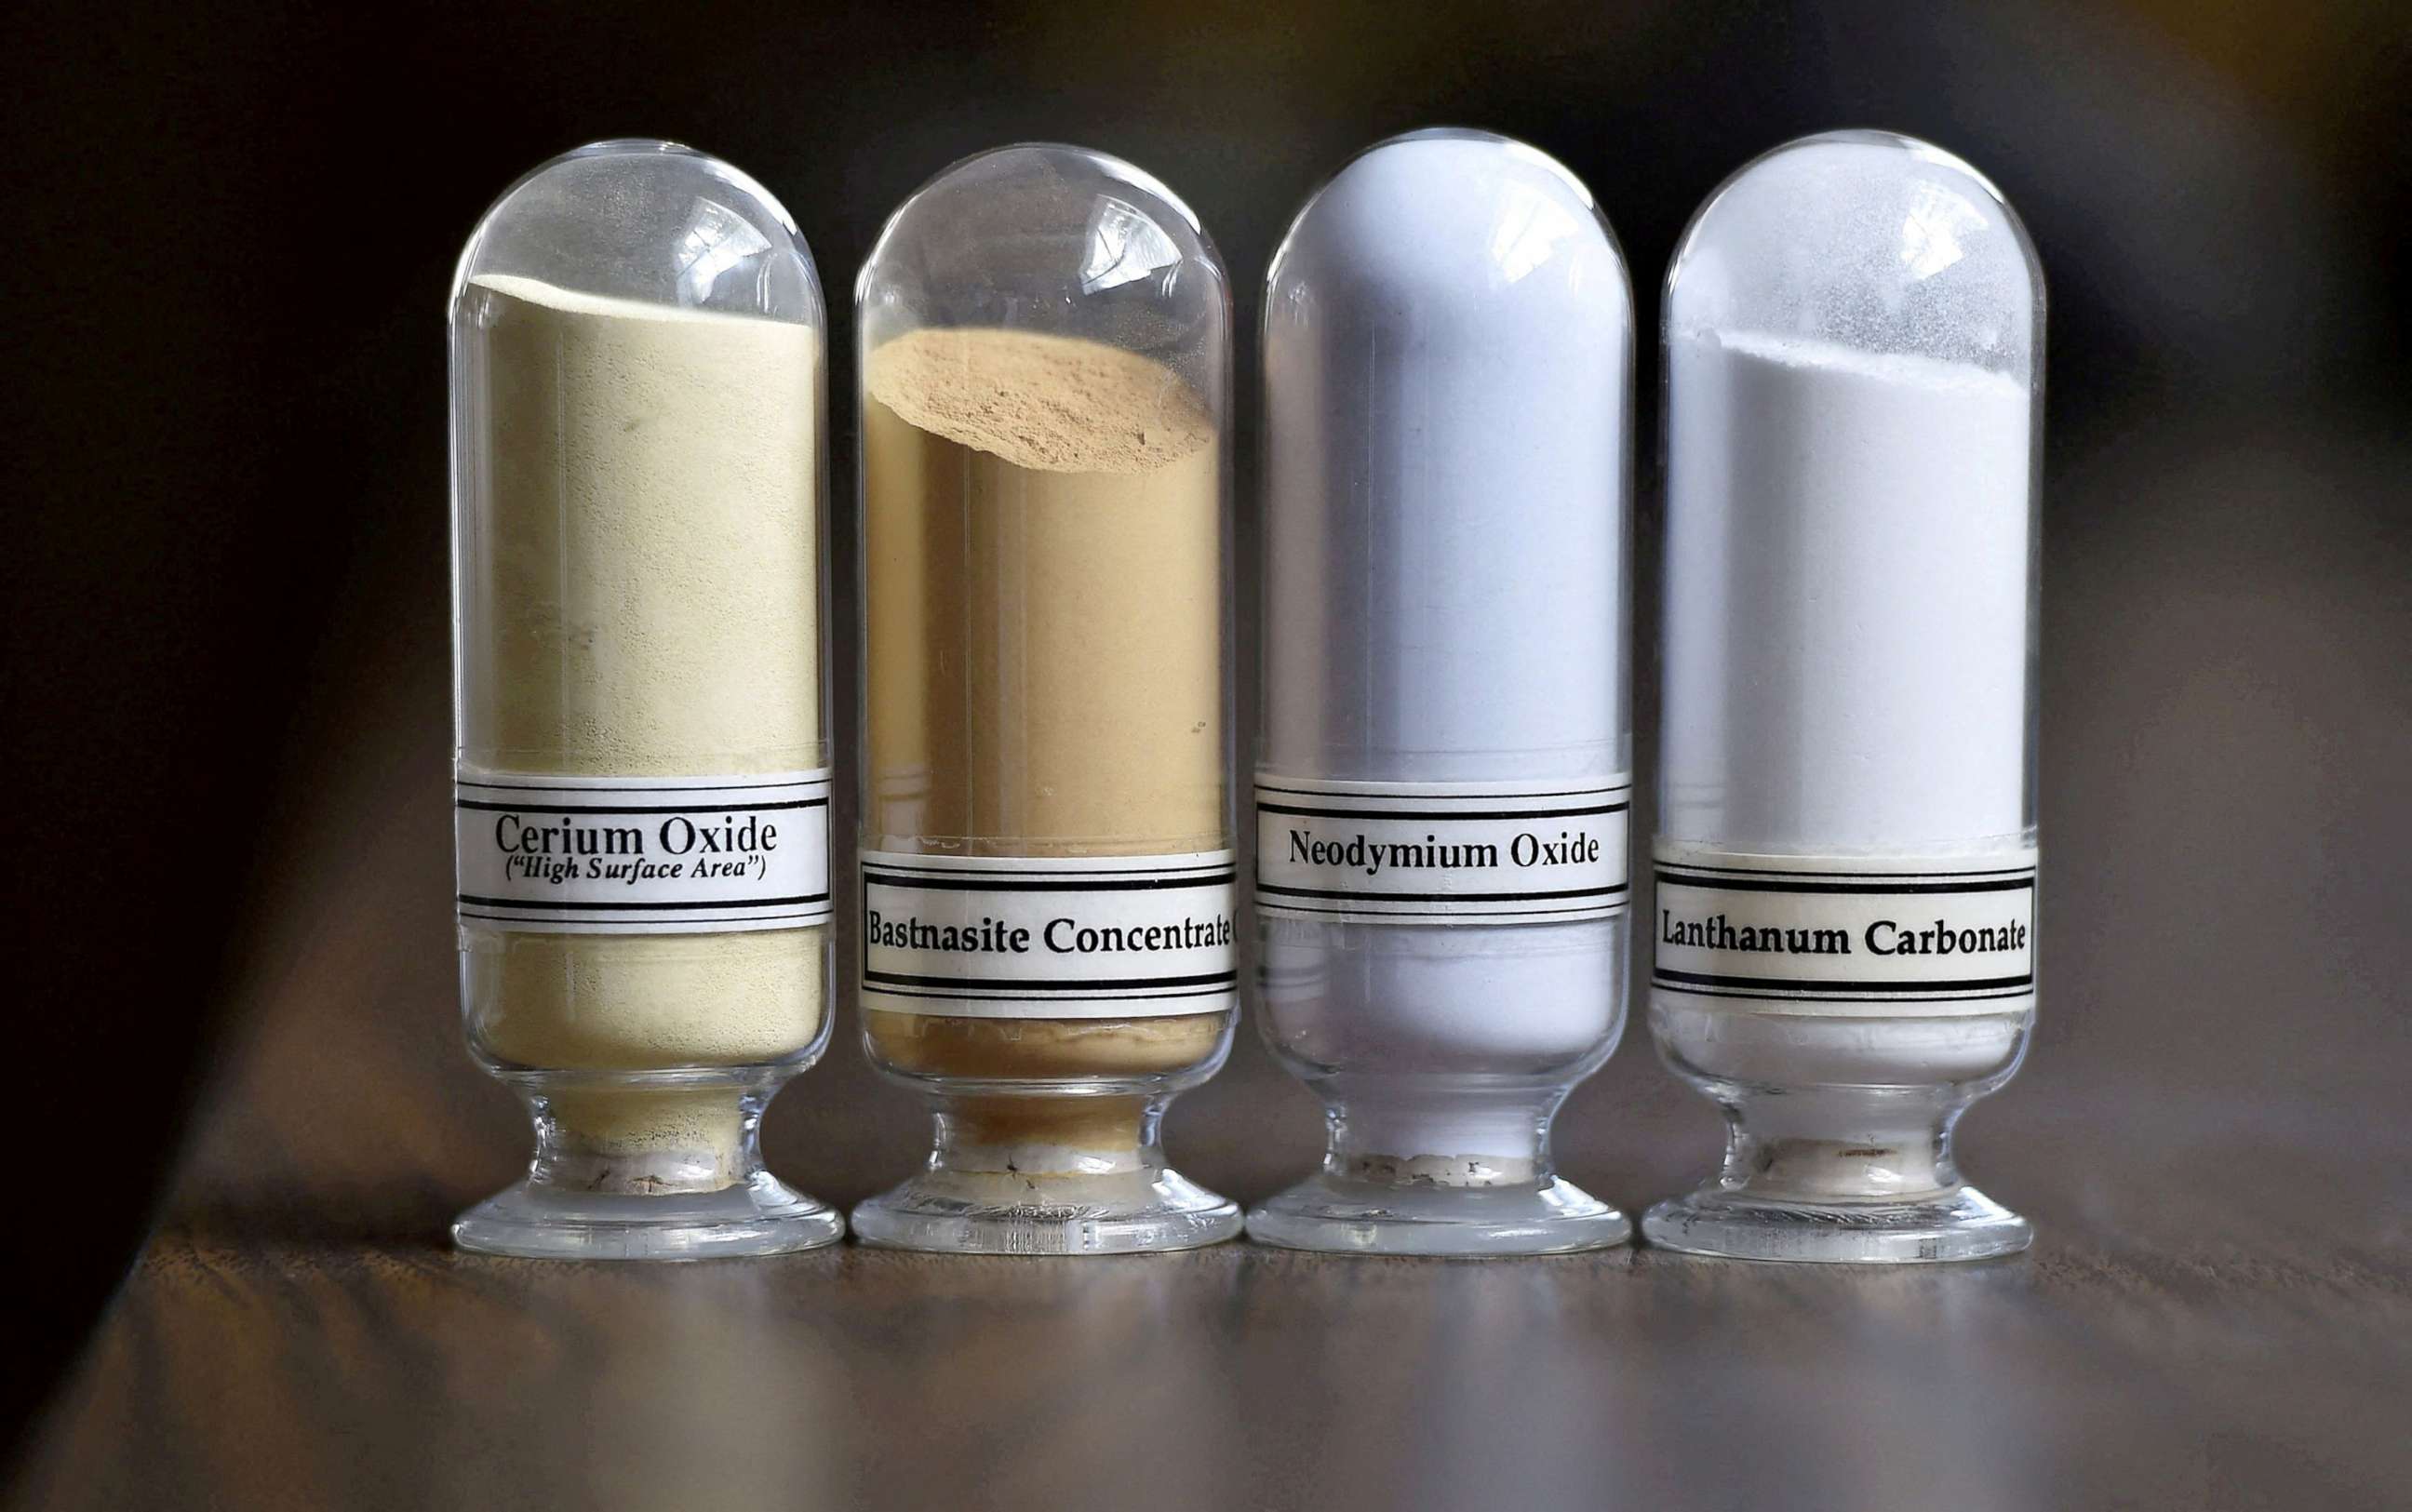 PHOTO: Samples of rare earth minerals, from left, Cerium oxide, Bastnaesite, Neodymium oxide and Lanthanum carbonate at Molycorp's Mountain Pass Rare Earth facility in Mountain Pass, Calif., June 29, 2015.